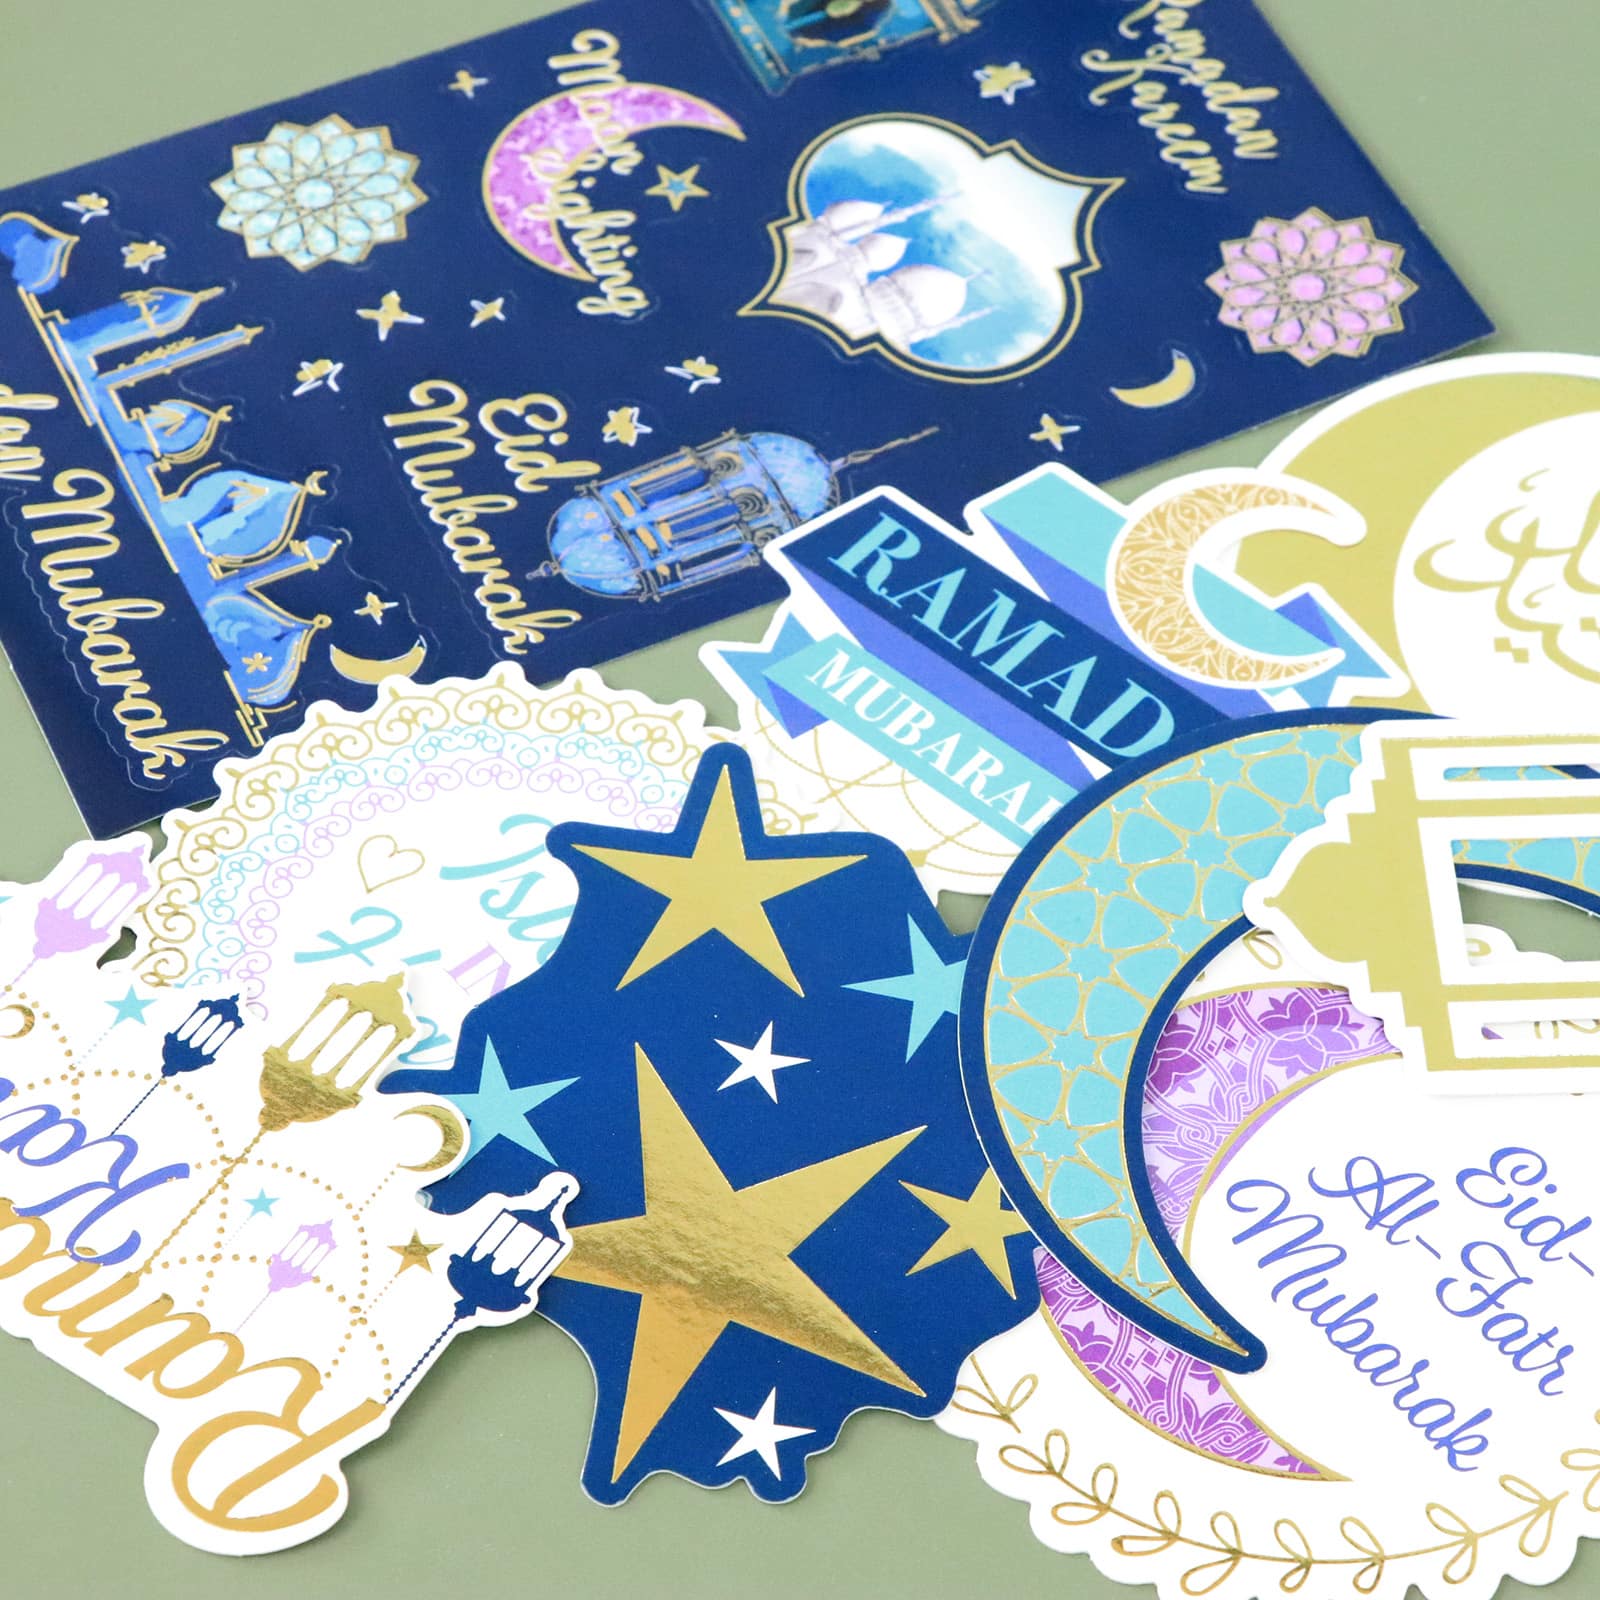 Ramadan Holiday Stickers by Recollections&#x2122;